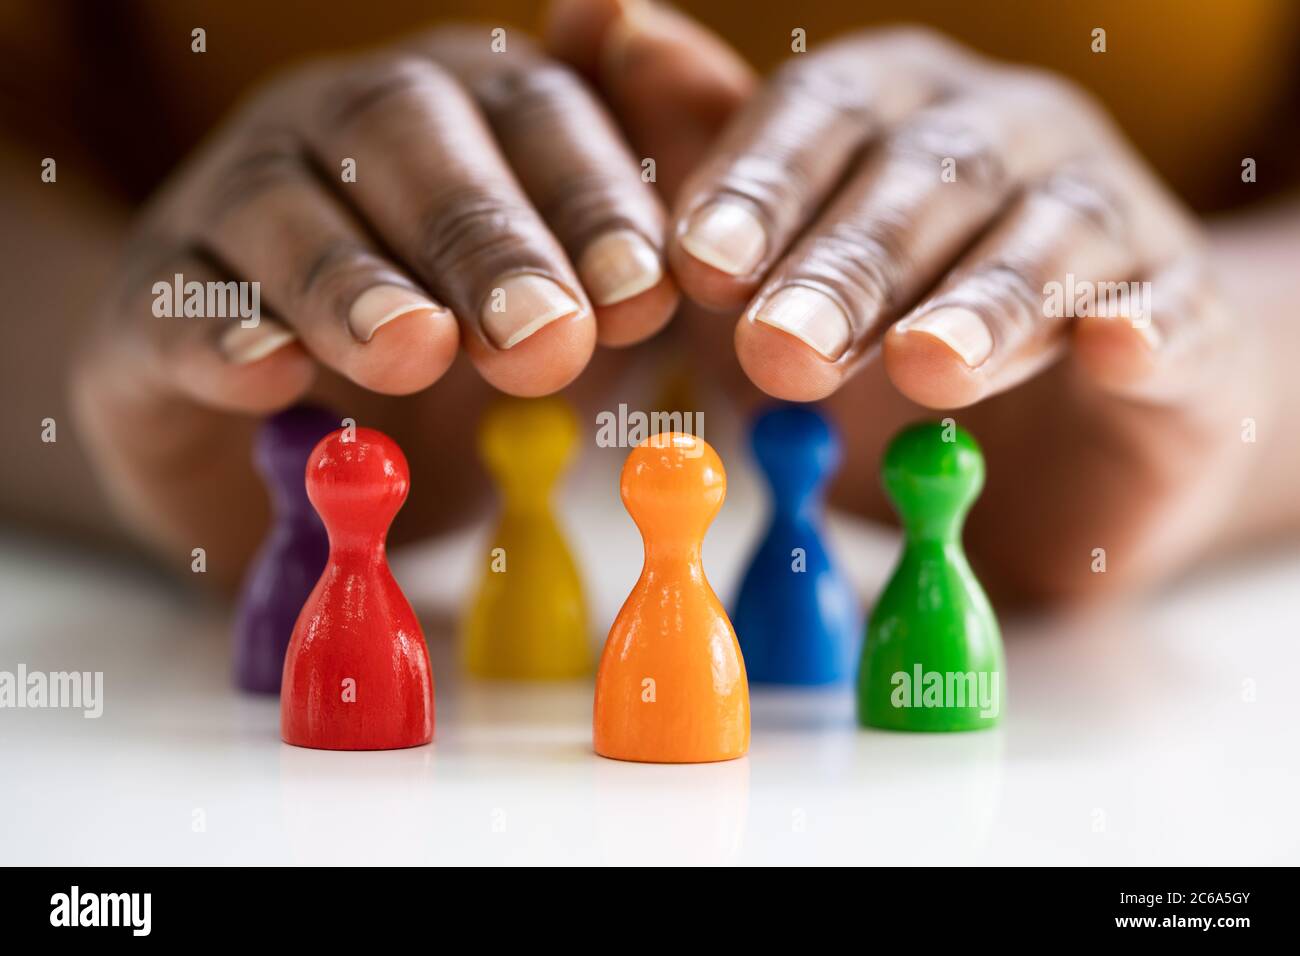 Diversity And Inclusion Concept. Hand Protecting Hand Colored Staff Pawns In Circle Stock Photo